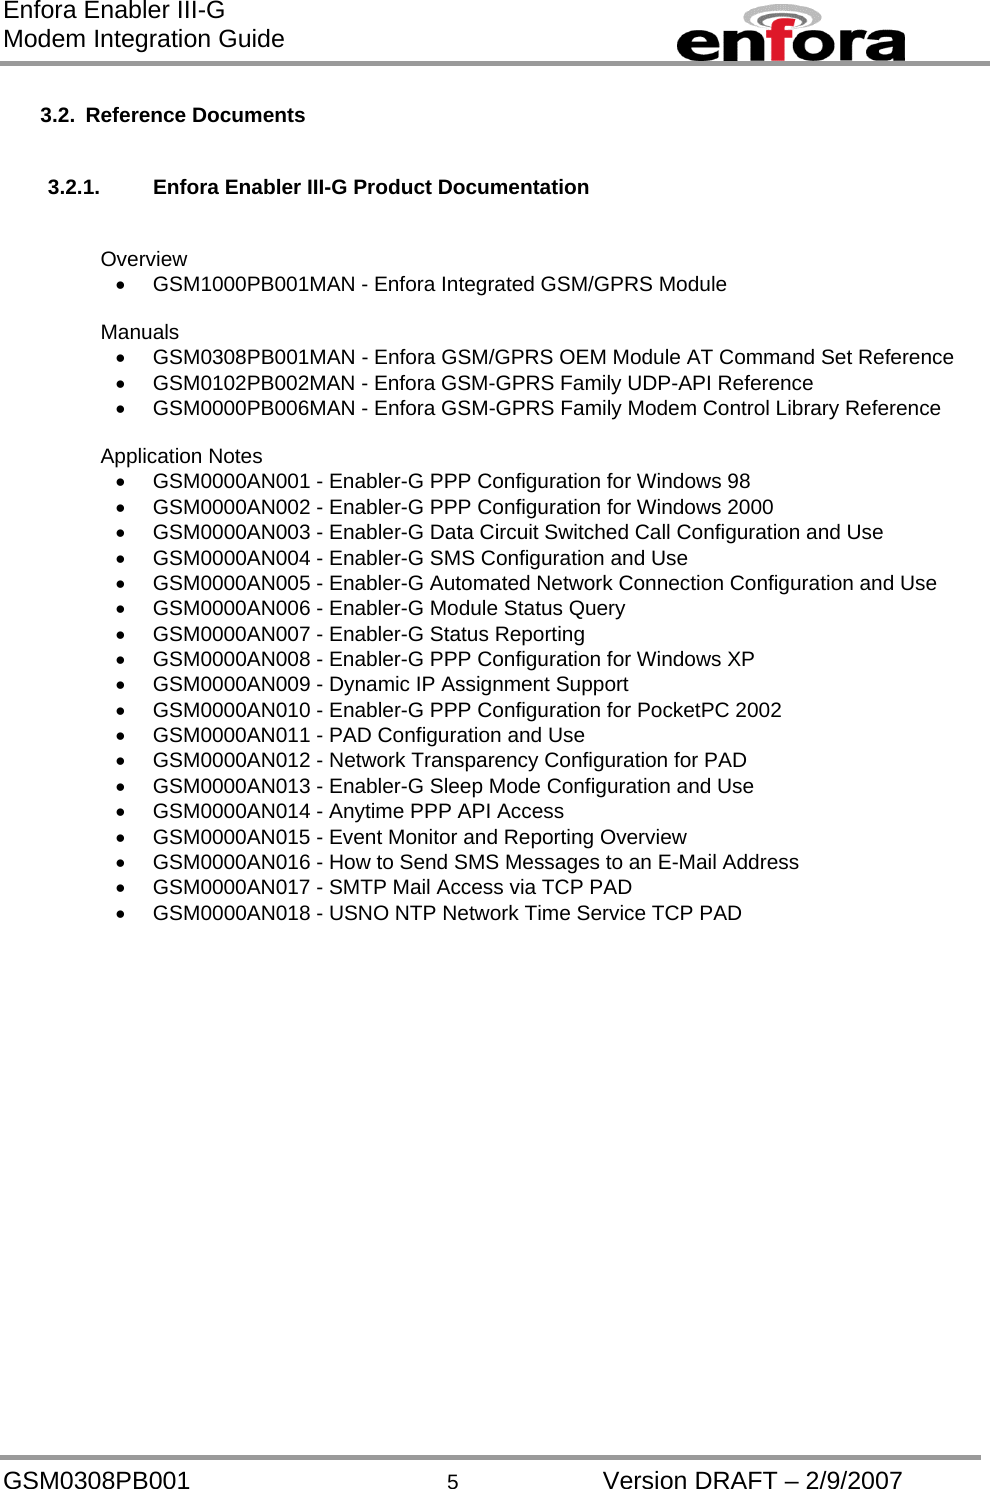 Enfora Enabler III-G Modem Integration Guide  3.2. Reference Documents   3.2.1.  Enfora Enabler III-G Product Documentation   Overview •  GSM1000PB001MAN - Enfora Integrated GSM/GPRS Module   Manuals •  GSM0308PB001MAN - Enfora GSM/GPRS OEM Module AT Command Set Reference •  GSM0102PB002MAN - Enfora GSM-GPRS Family UDP-API Reference   •  GSM0000PB006MAN - Enfora GSM-GPRS Family Modem Control Library Reference   Application Notes •  GSM0000AN001 - Enabler-G PPP Configuration for Windows 98 •  GSM0000AN002 - Enabler-G PPP Configuration for Windows 2000 •  GSM0000AN003 - Enabler-G Data Circuit Switched Call Configuration and Use •  GSM0000AN004 - Enabler-G SMS Configuration and Use •  GSM0000AN005 - Enabler-G Automated Network Connection Configuration and Use •  GSM0000AN006 - Enabler-G Module Status Query •  GSM0000AN007 - Enabler-G Status Reporting •  GSM0000AN008 - Enabler-G PPP Configuration for Windows XP •  GSM0000AN009 - Dynamic IP Assignment Support •  GSM0000AN010 - Enabler-G PPP Configuration for PocketPC 2002 •  GSM0000AN011 - PAD Configuration and Use •  GSM0000AN012 - Network Transparency Configuration for PAD •  GSM0000AN013 - Enabler-G Sleep Mode Configuration and Use •  GSM0000AN014 - Anytime PPP API Access •  GSM0000AN015 - Event Monitor and Reporting Overview •  GSM0000AN016 - How to Send SMS Messages to an E-Mail Address •  GSM0000AN017 - SMTP Mail Access via TCP PAD •  GSM0000AN018 - USNO NTP Network Time Service TCP PAD GSM0308PB001  5  Version DRAFT – 2/9/2007 